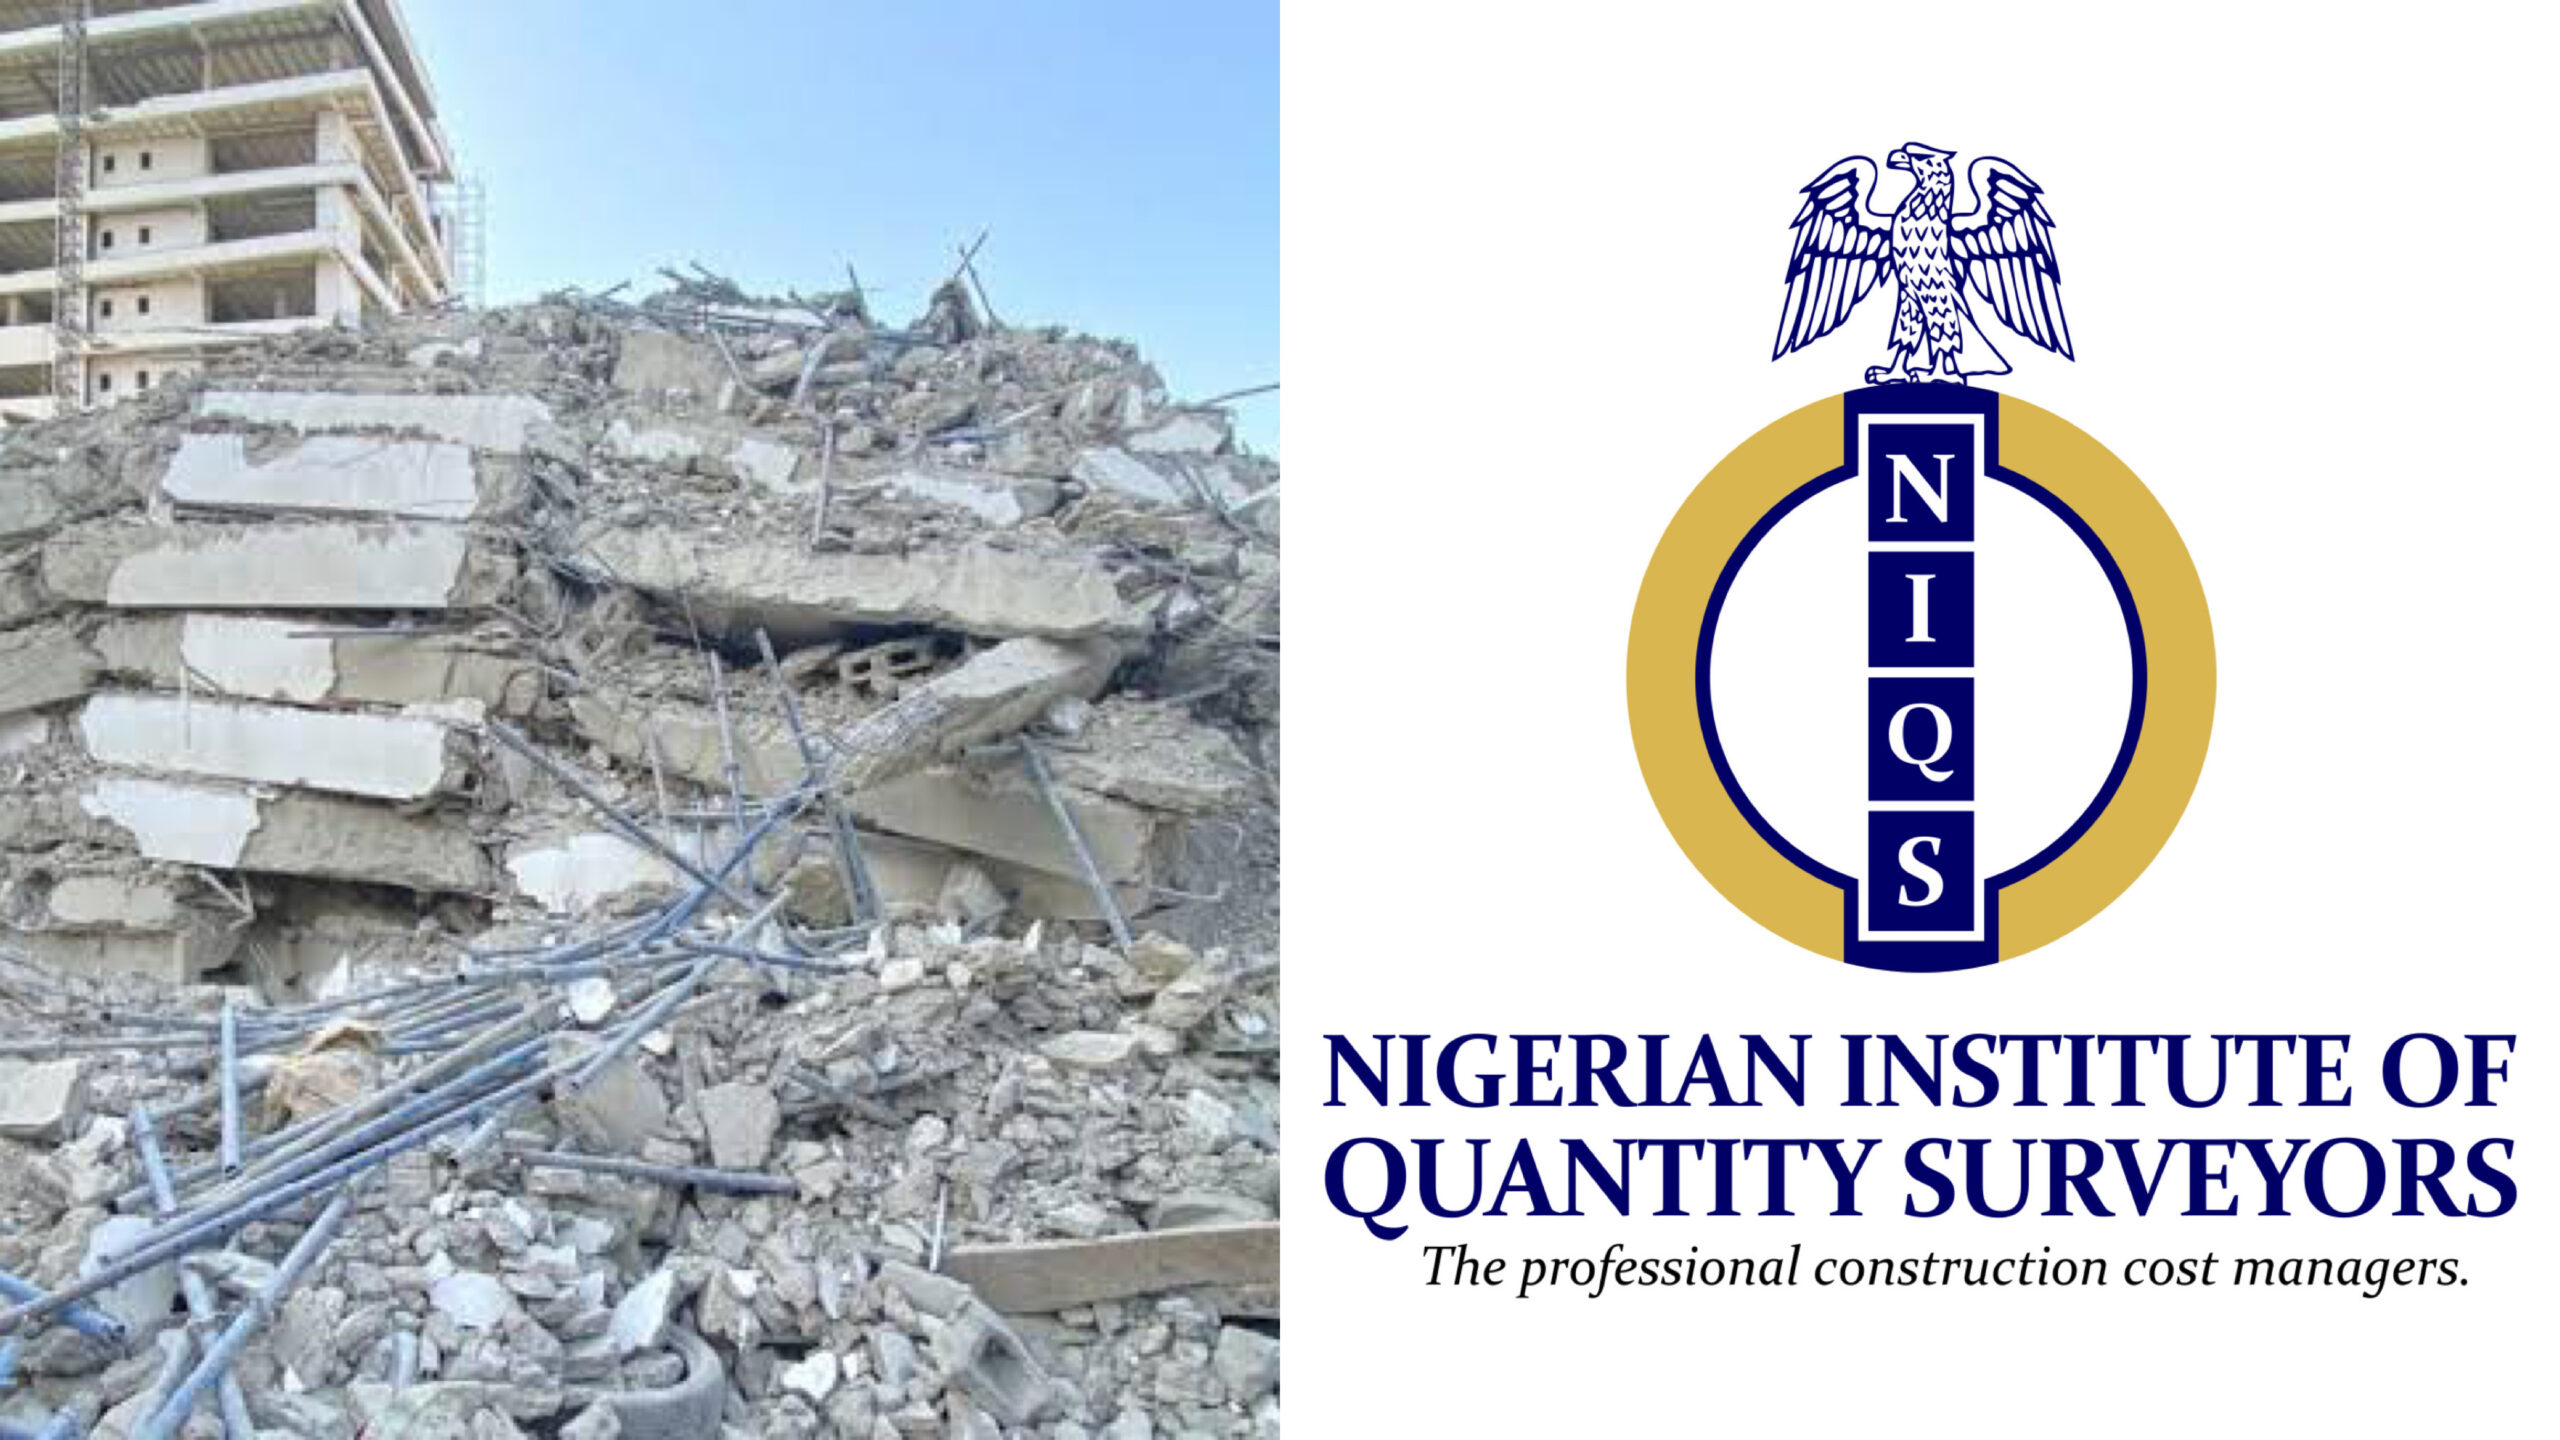 A collapsed building and Nigerian Institute of Quantity Surveyors (NIQS) used to illustrate the story